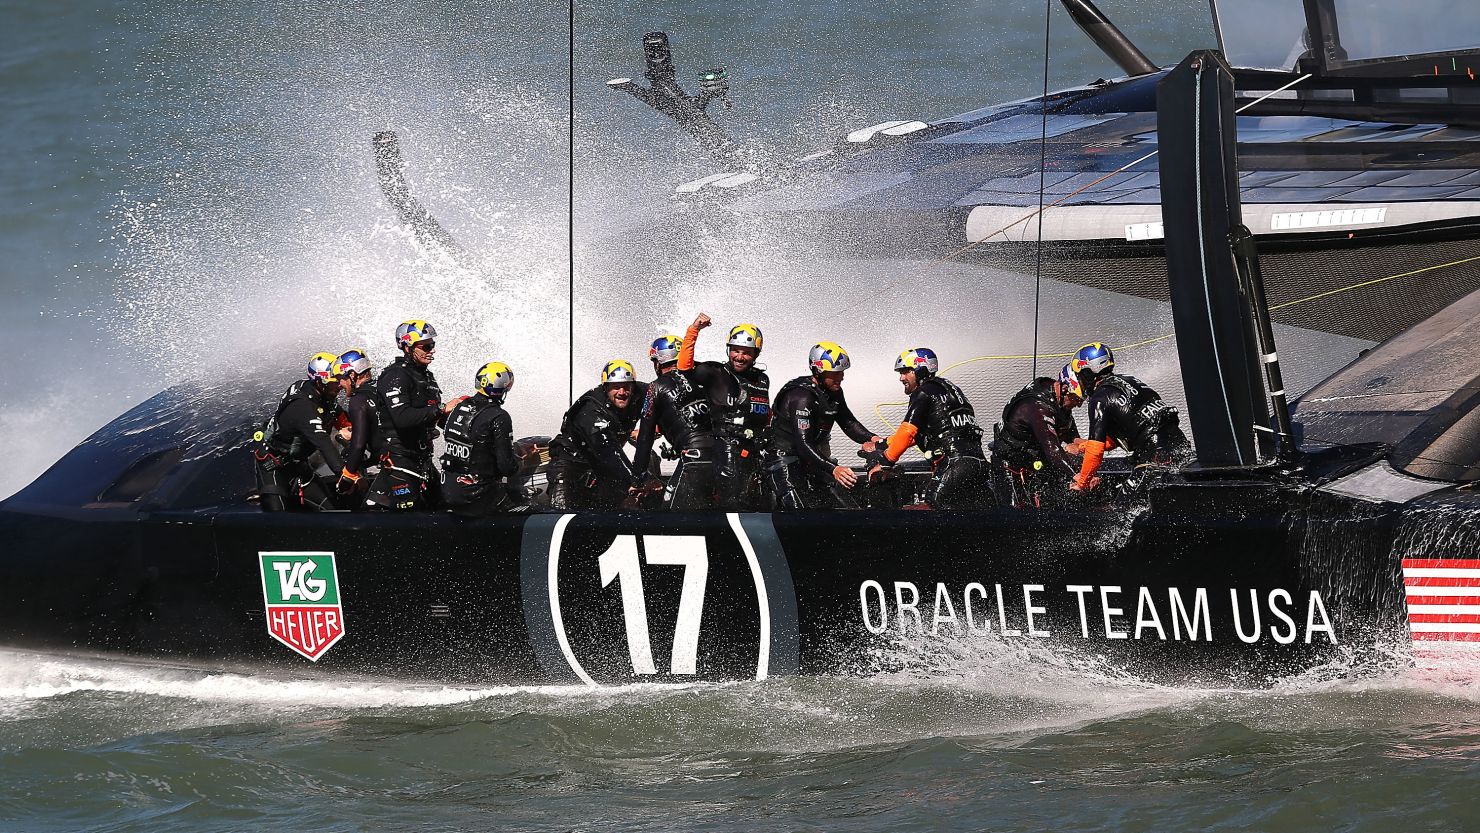 Oracle Team USA,skippered by James Spithill,celebrates after leveling the series with Emirates Team New Zealand.